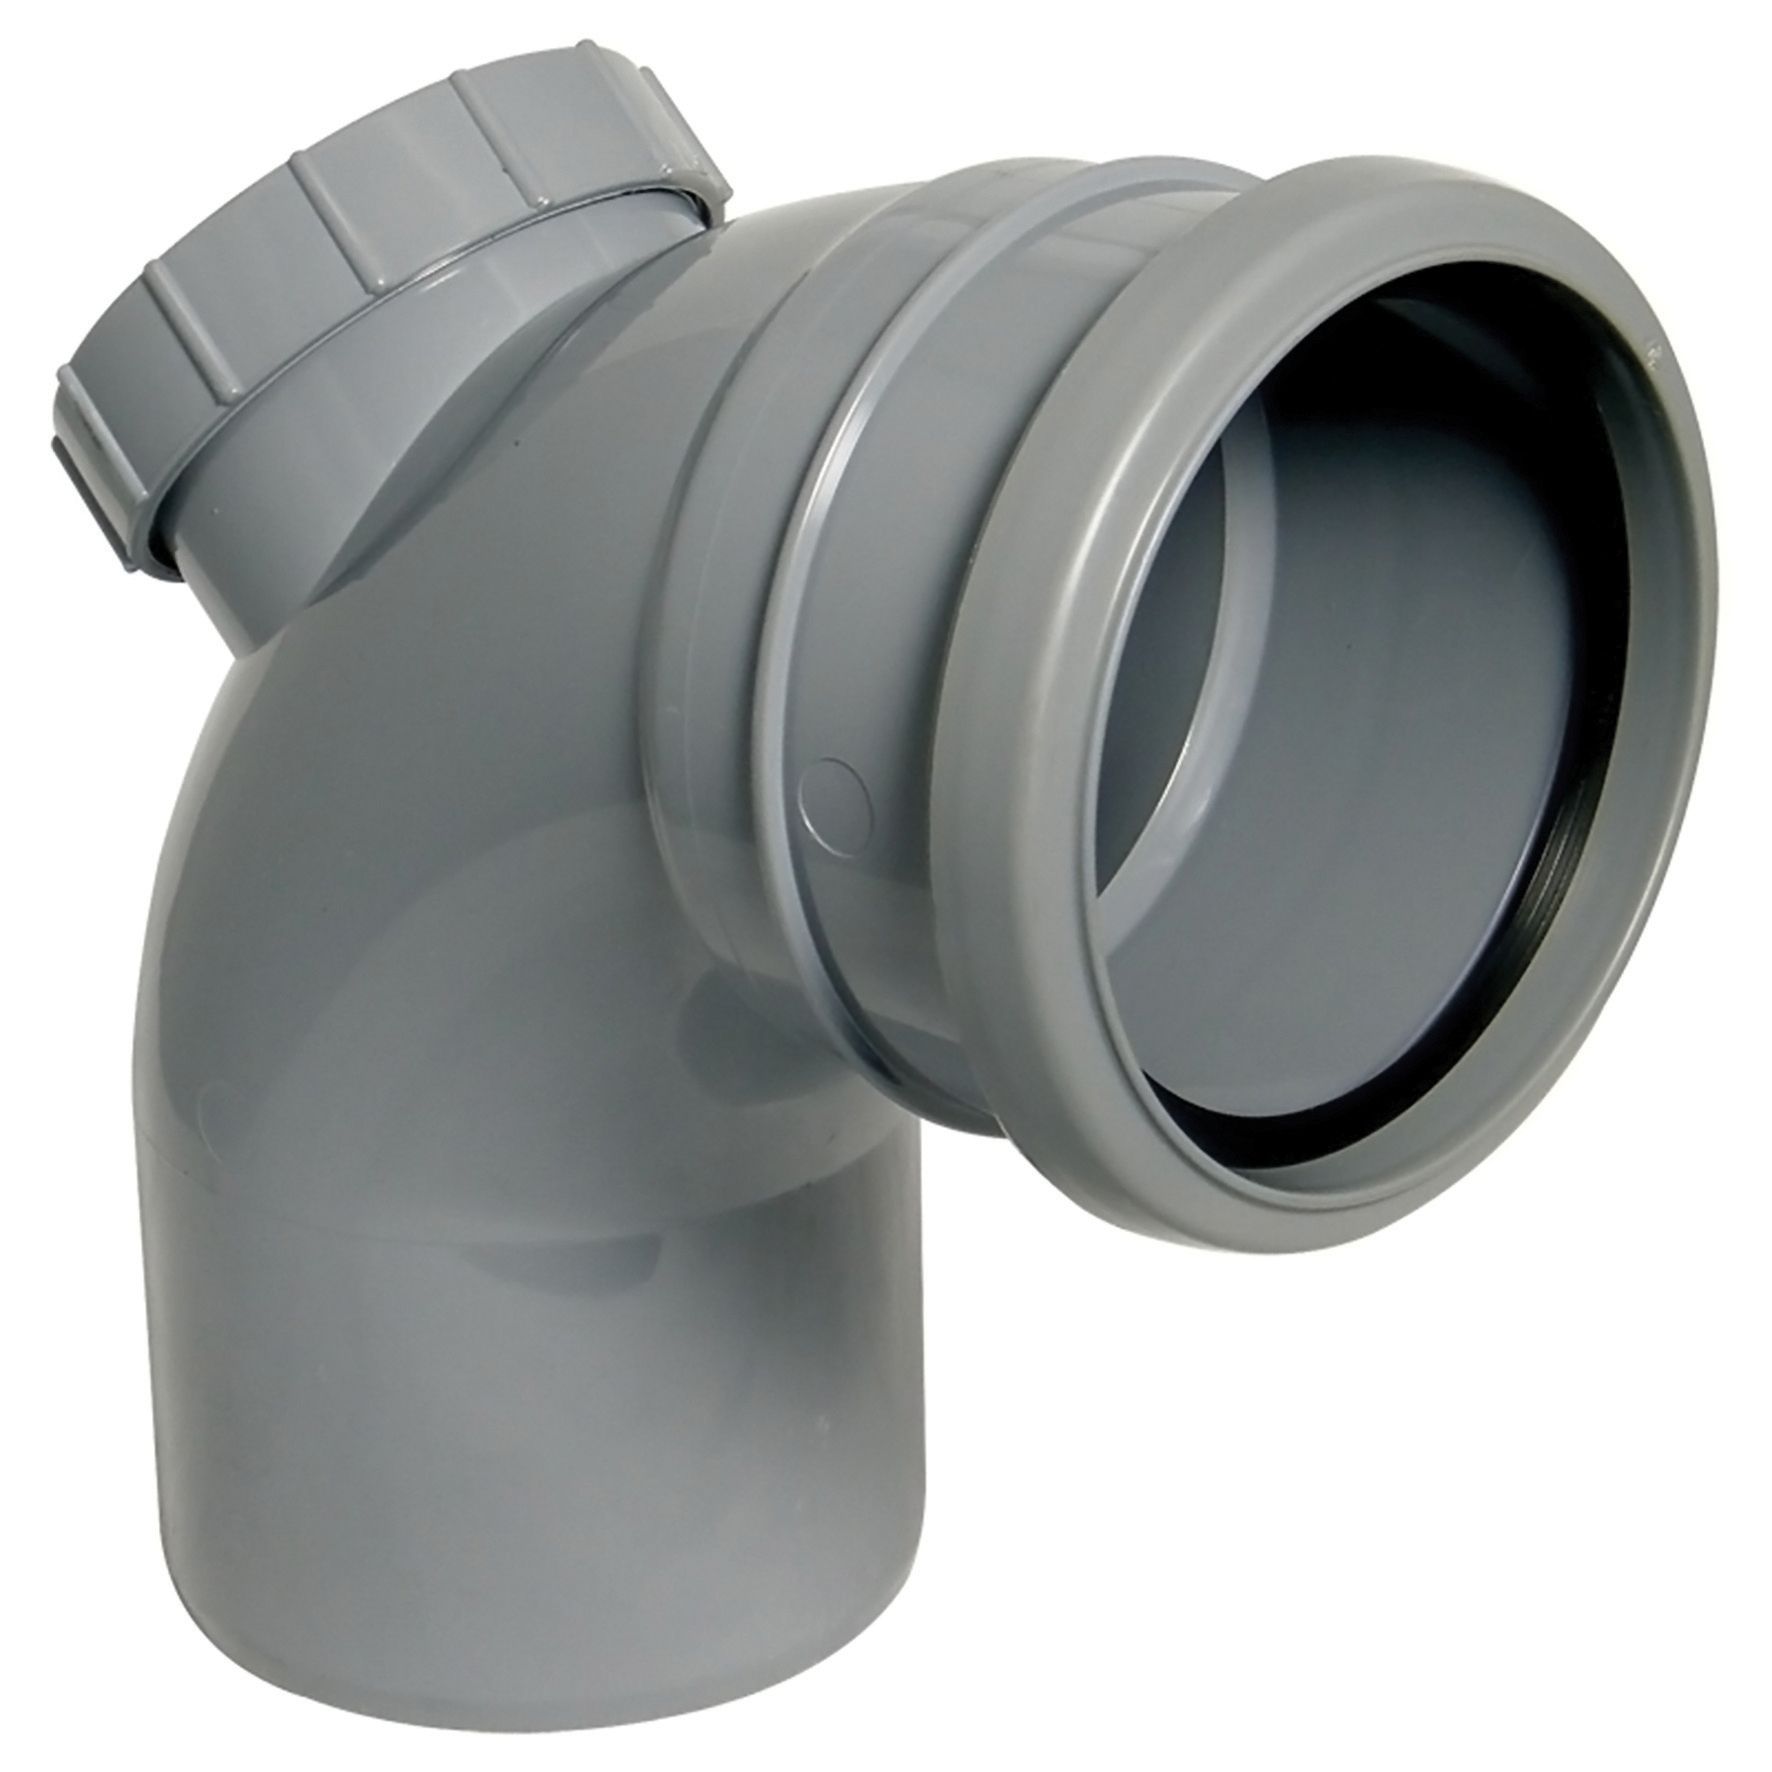 Image of FloPlast 110mm Soil Pipe Access Bend 92.5°- Grey